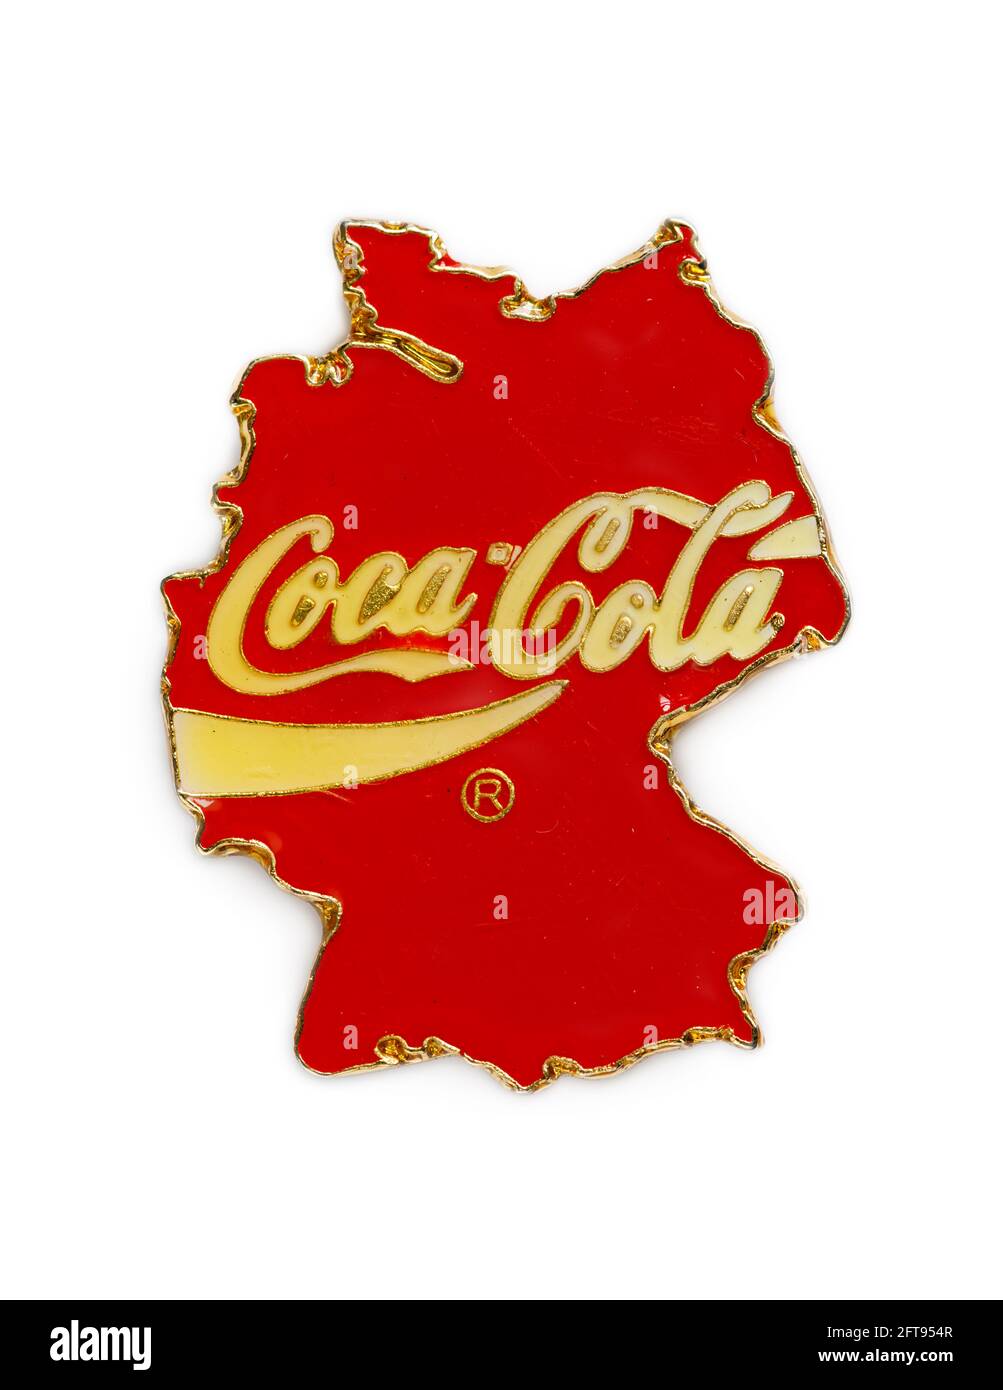 Rare Coca-Cola advertising pin badge of West Germany, prior to re-unification. Stock Photo